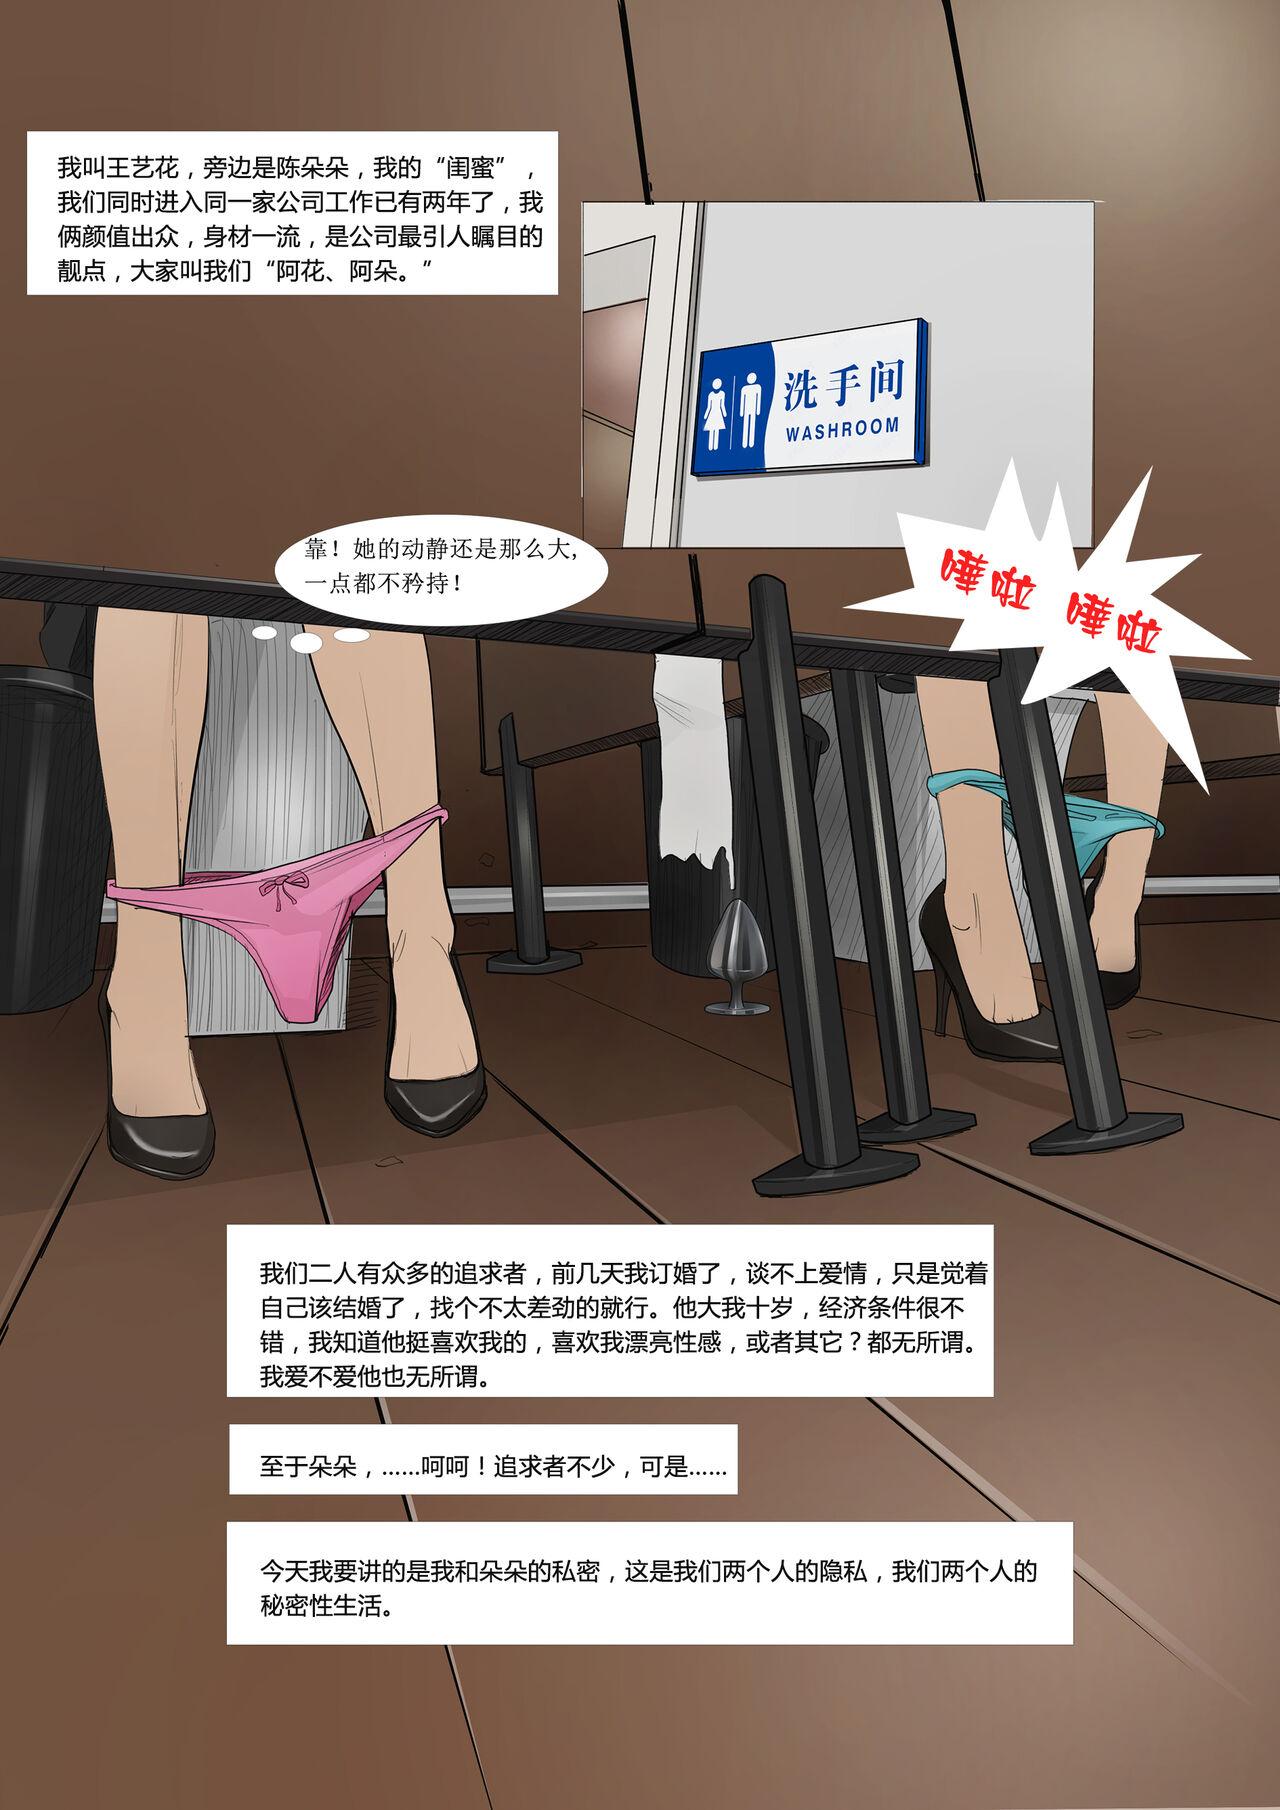 Masterbation 枫语Foryou《阿花与阿朵》第一话 A hua and A duo 1 Chinese Magrinha - Page 2